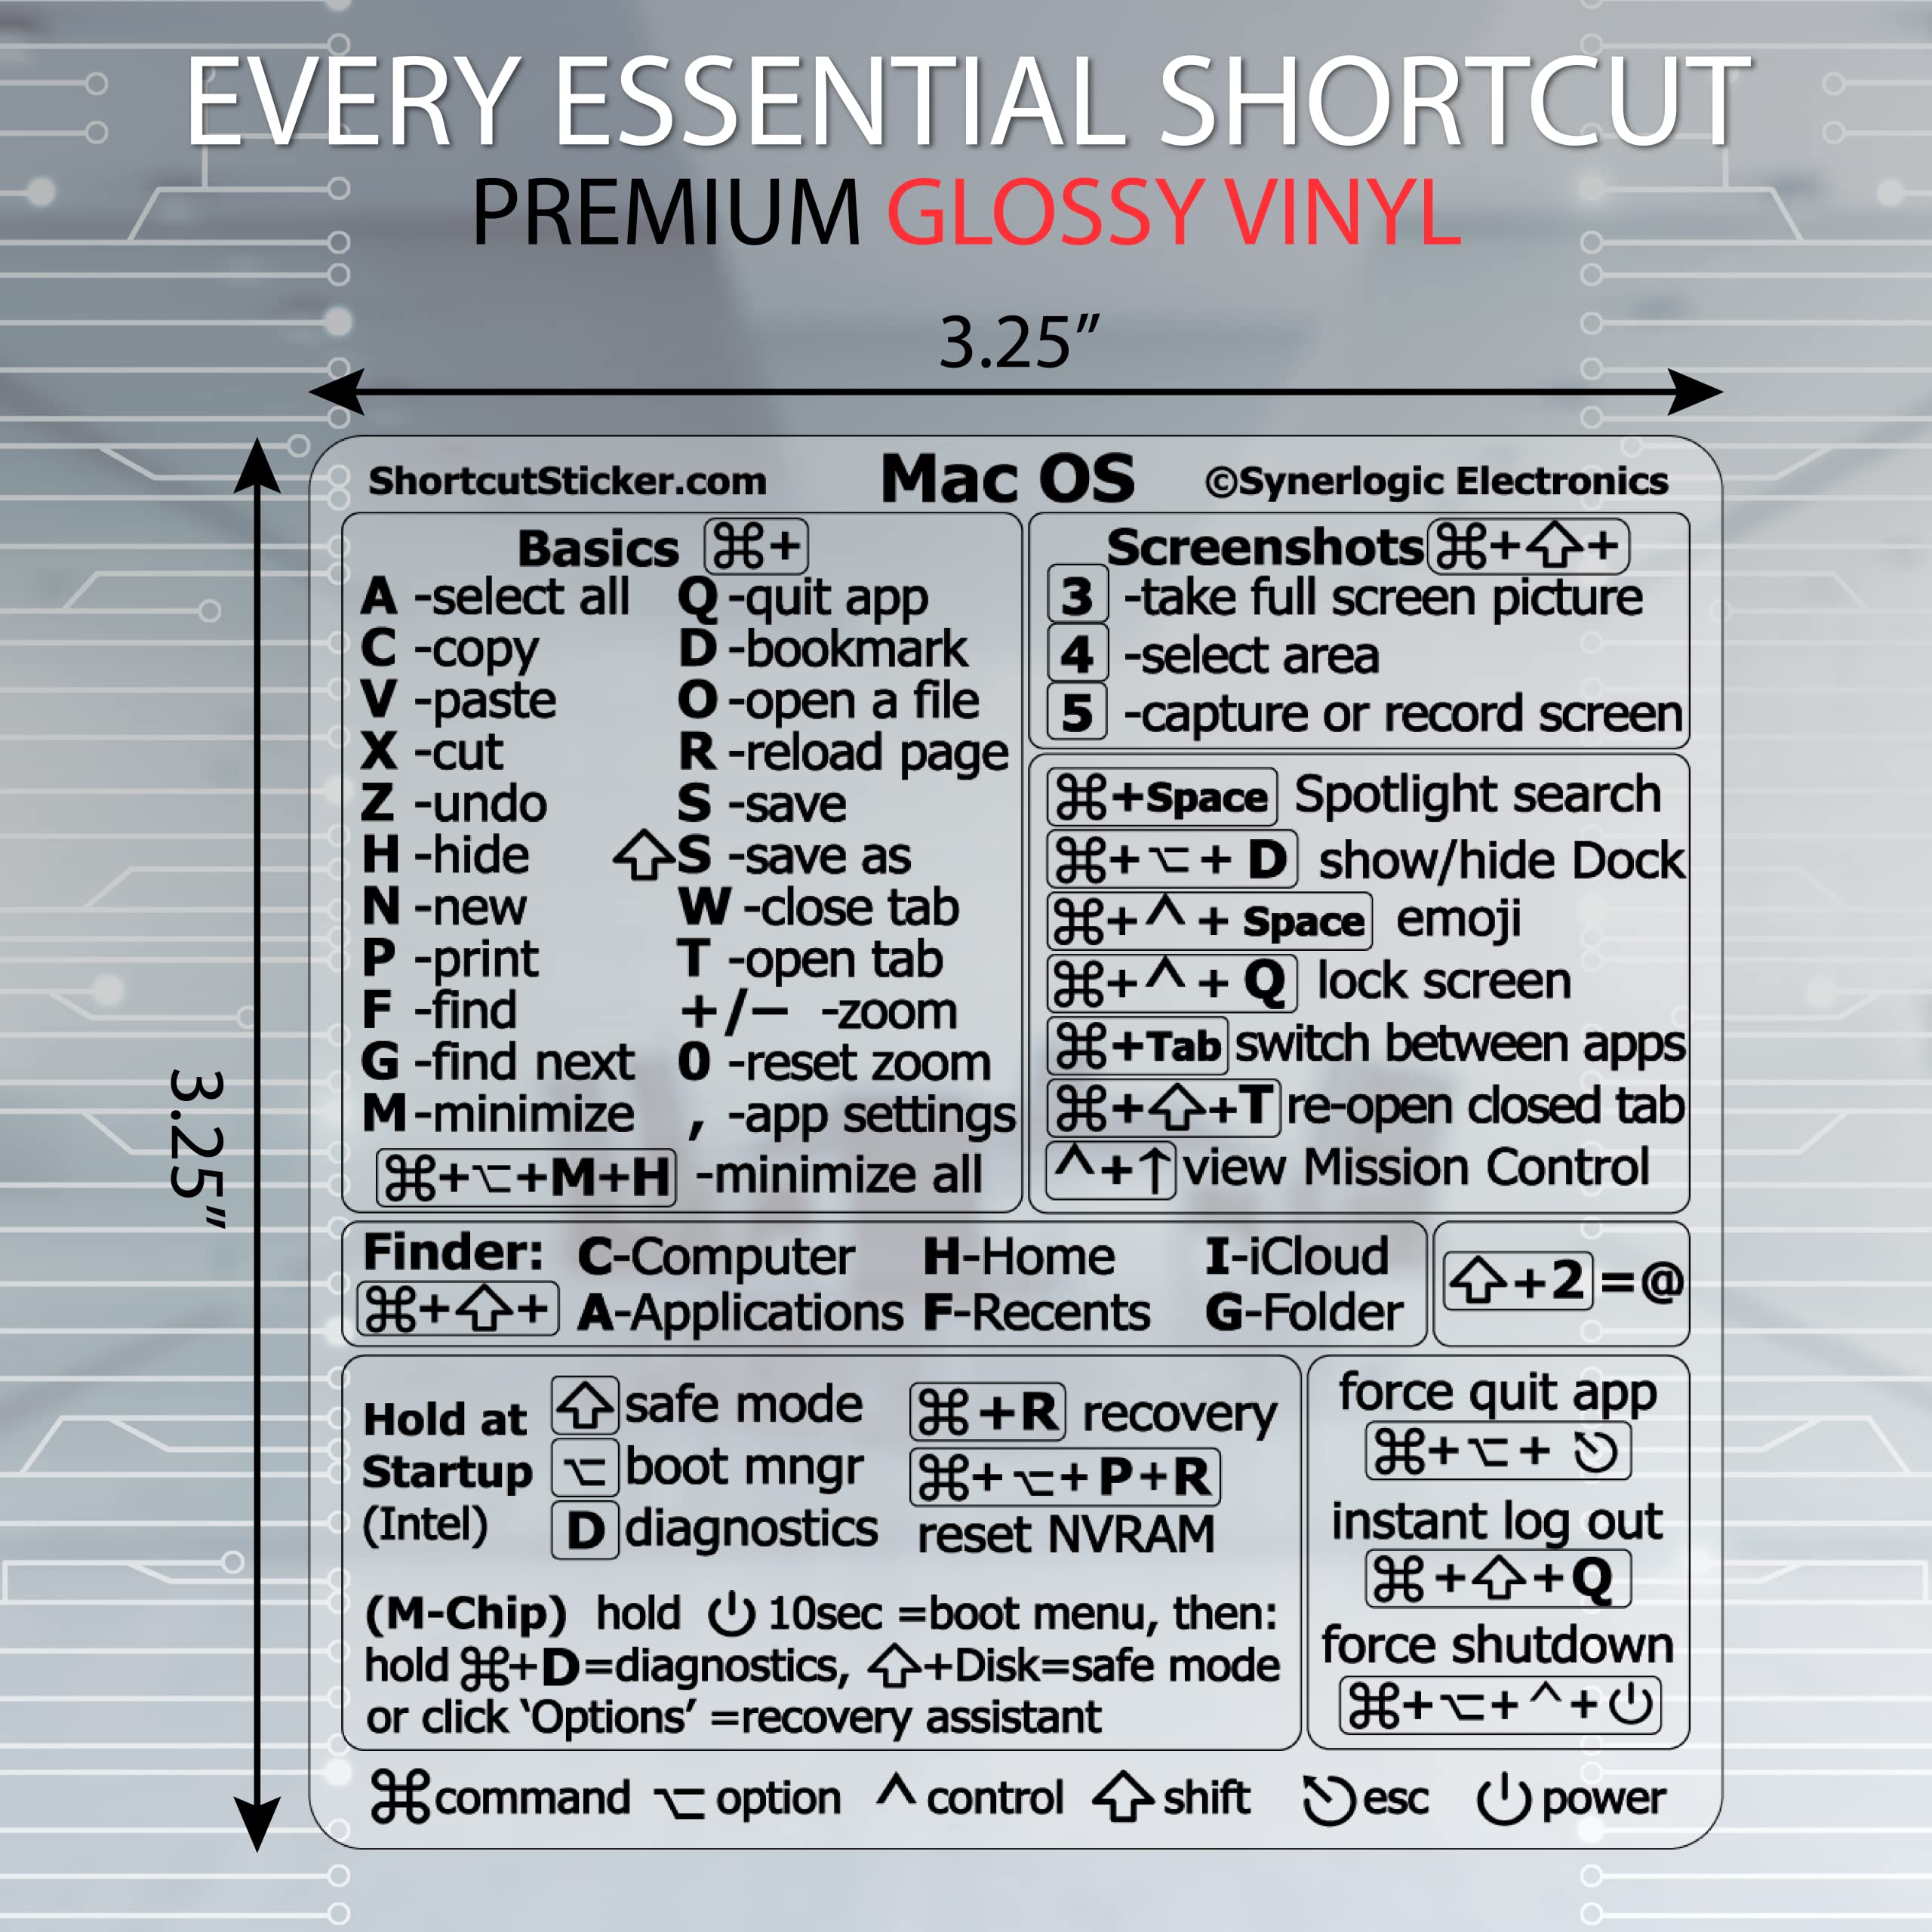 SYNERLOGIC Mac OS (Ventura/Monterey/Big Sur/Catalina/Mojave) Keyboard Shortcuts, M1/M2/Intel No-Residue Clear Vinyl Sticker, Compatible with 13-16-inch MacBook Air and Pro